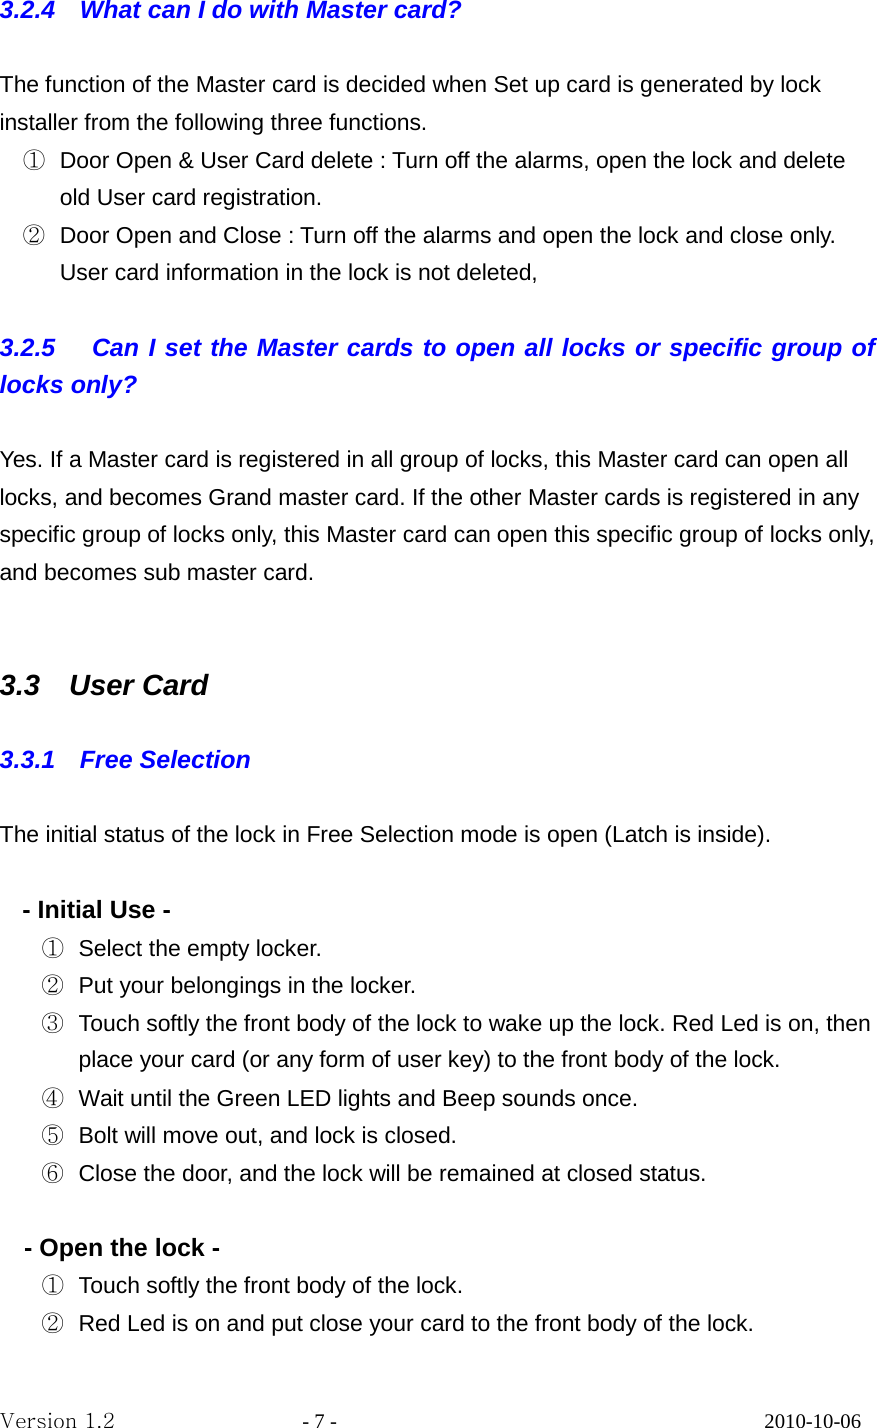 3.2.4    What can I do with Master card?  The function of the Master card is decided when Set up card is generated by lock installer from the following three functions. ① Door Open &amp; User Card delete : Turn off the alarms, open the lock and delete old User card registration. ② Door Open and Close : Turn off the alarms and open the lock and close only. User card information in the lock is not deleted,  3.2.5   Can I set the Master cards to open all locks or specific group of locks only?  Yes. If a Master card is registered in all group of locks, this Master card can open all locks, and becomes Grand master card. If the other Master cards is registered in any specific group of locks only, this Master card can open this specific group of locks only, and becomes sub master card.   3.3  User Card  3.3.1  Free Selection   The initial status of the lock in Free Selection mode is open (Latch is inside).    - Initial Use -   ① Select the empty locker. ② Put your belongings in the locker. ③ Touch softly the front body of the lock to wake up the lock. Red Led is on, then place your card (or any form of user key) to the front body of the lock. ④ Wait until the Green LED lights and Beep sounds once. ⑤ Bolt will move out, and lock is closed.   ⑥ Close the door, and the lock will be remained at closed status.  - Open the lock - ① Touch softly the front body of the lock. ② Red Led is on and put close your card to the front body of the lock. Version 1.2                  - 7 -                                         2010-10-06 